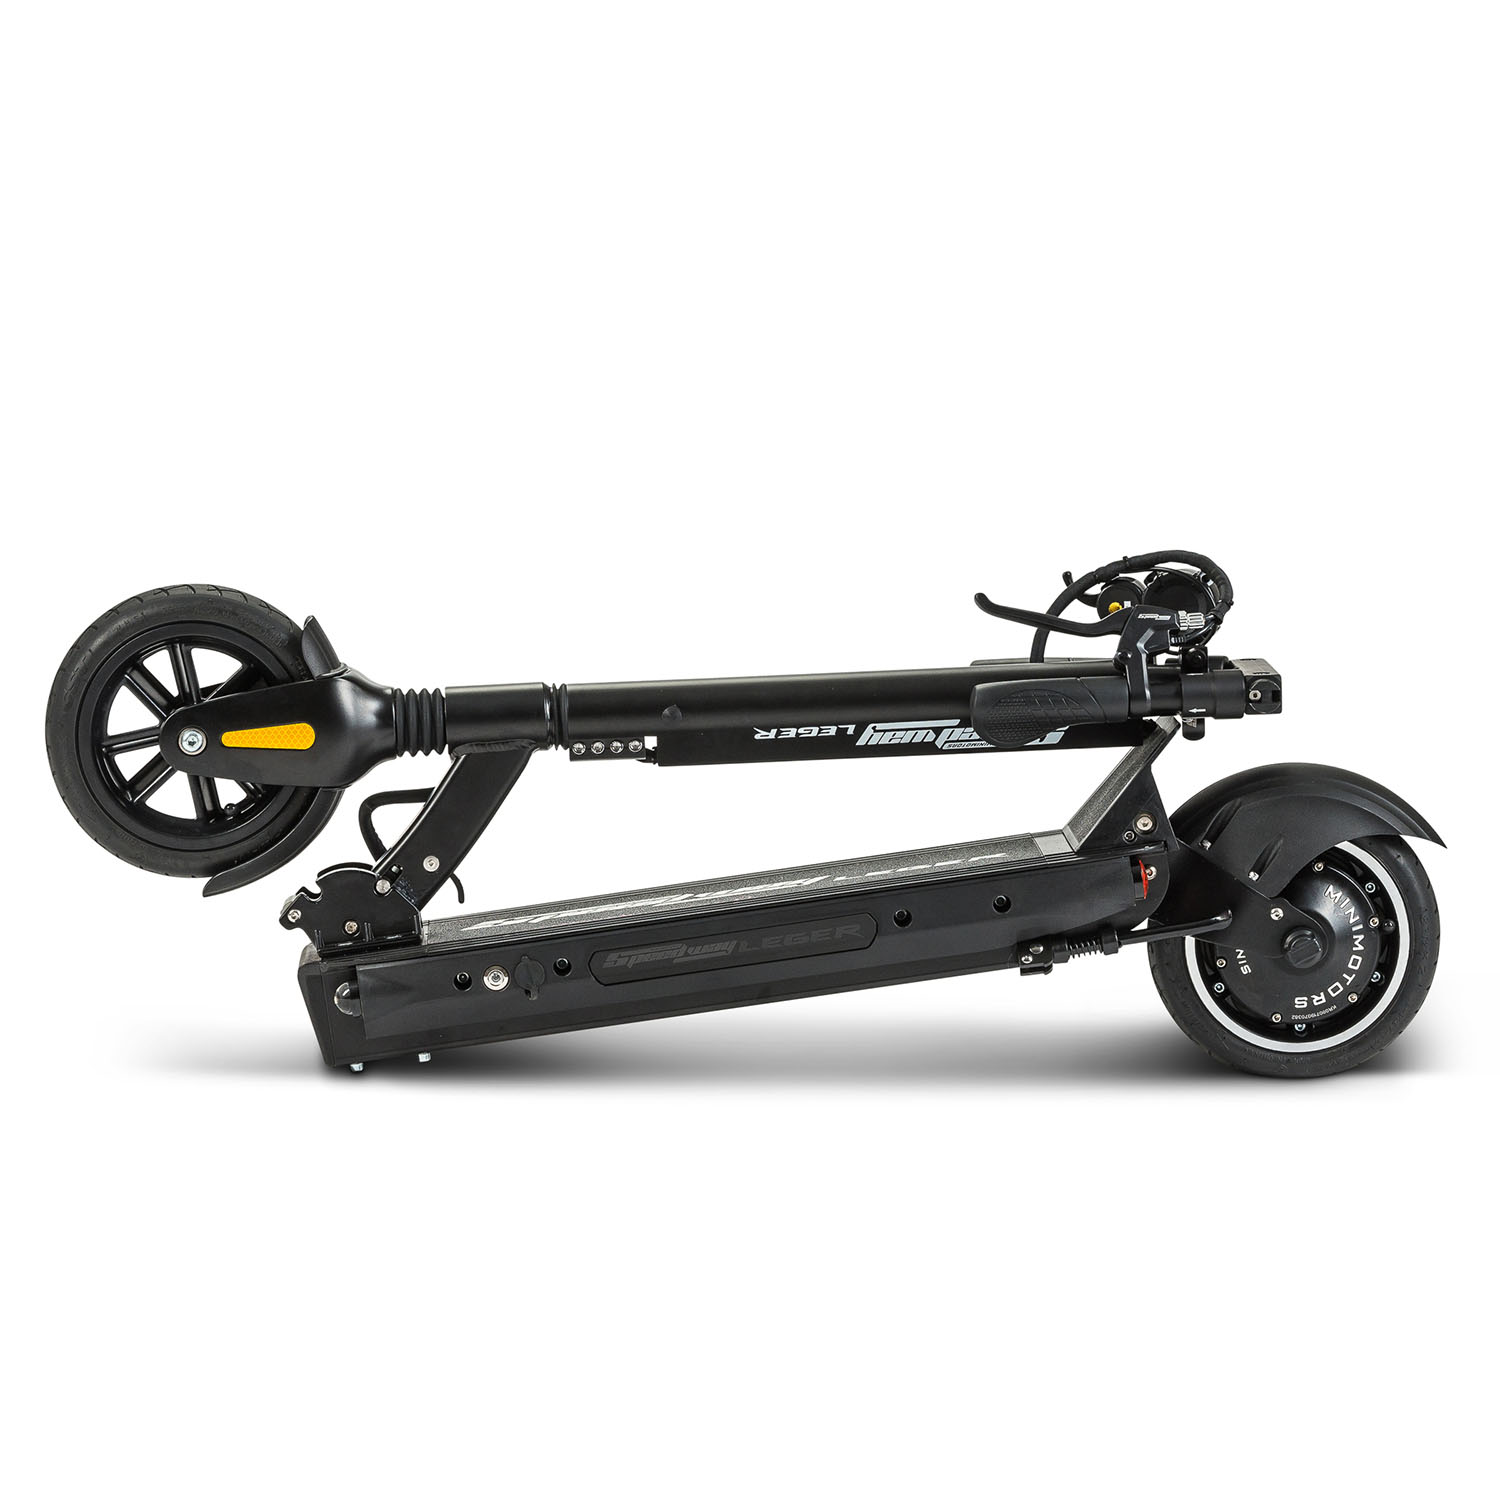 Speedway Leger Compact City Scooter elettrico ripiegato